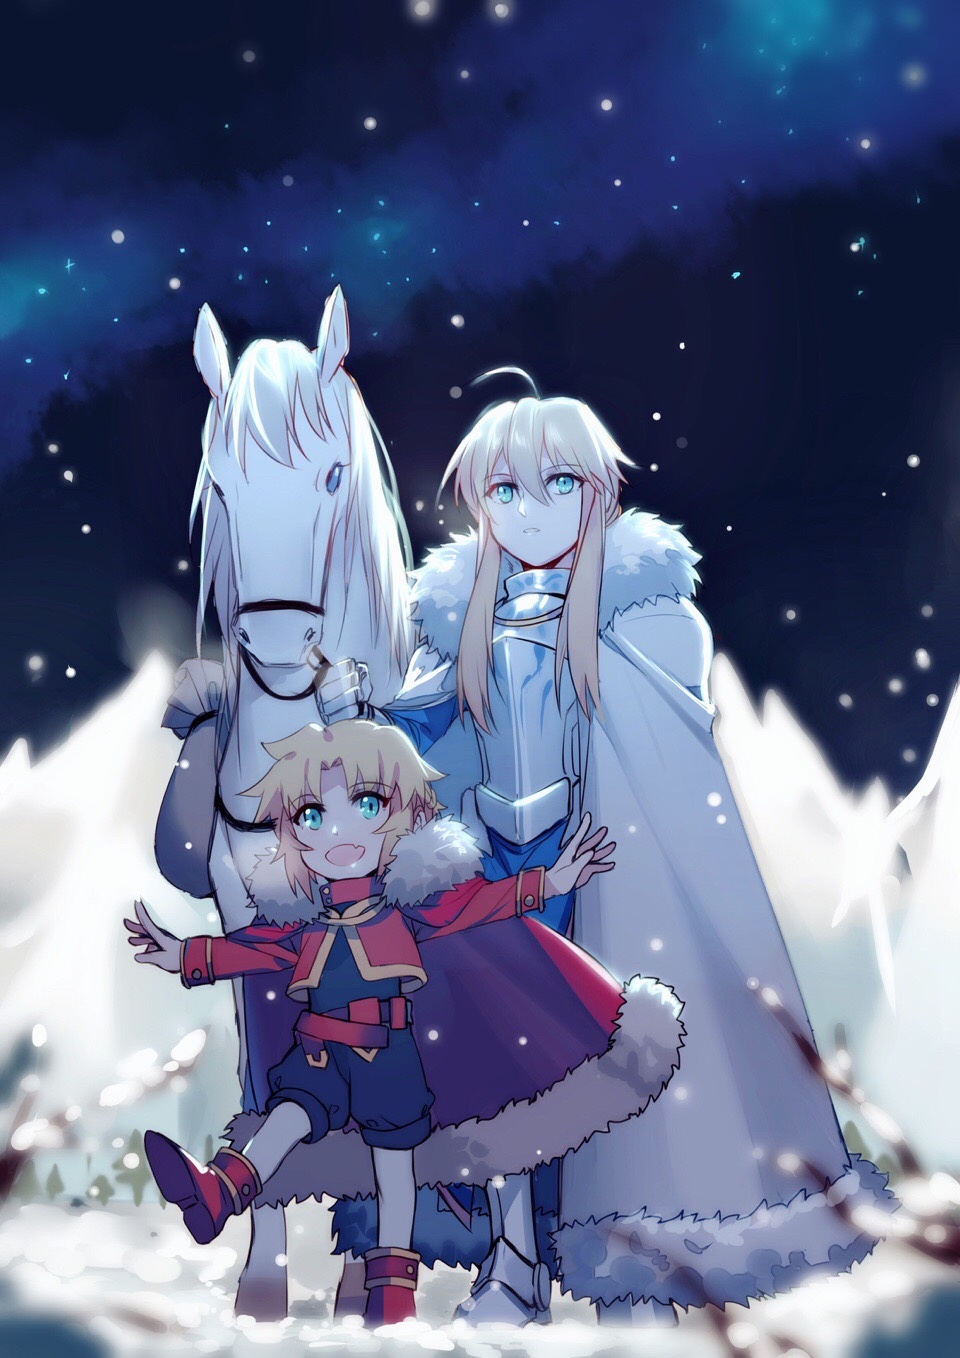 Fate Series FGO Fate Apocrypha Fate Grand Order Fate Stay Night Anime Girls Long Hair Blond Hair Sno 960x1358